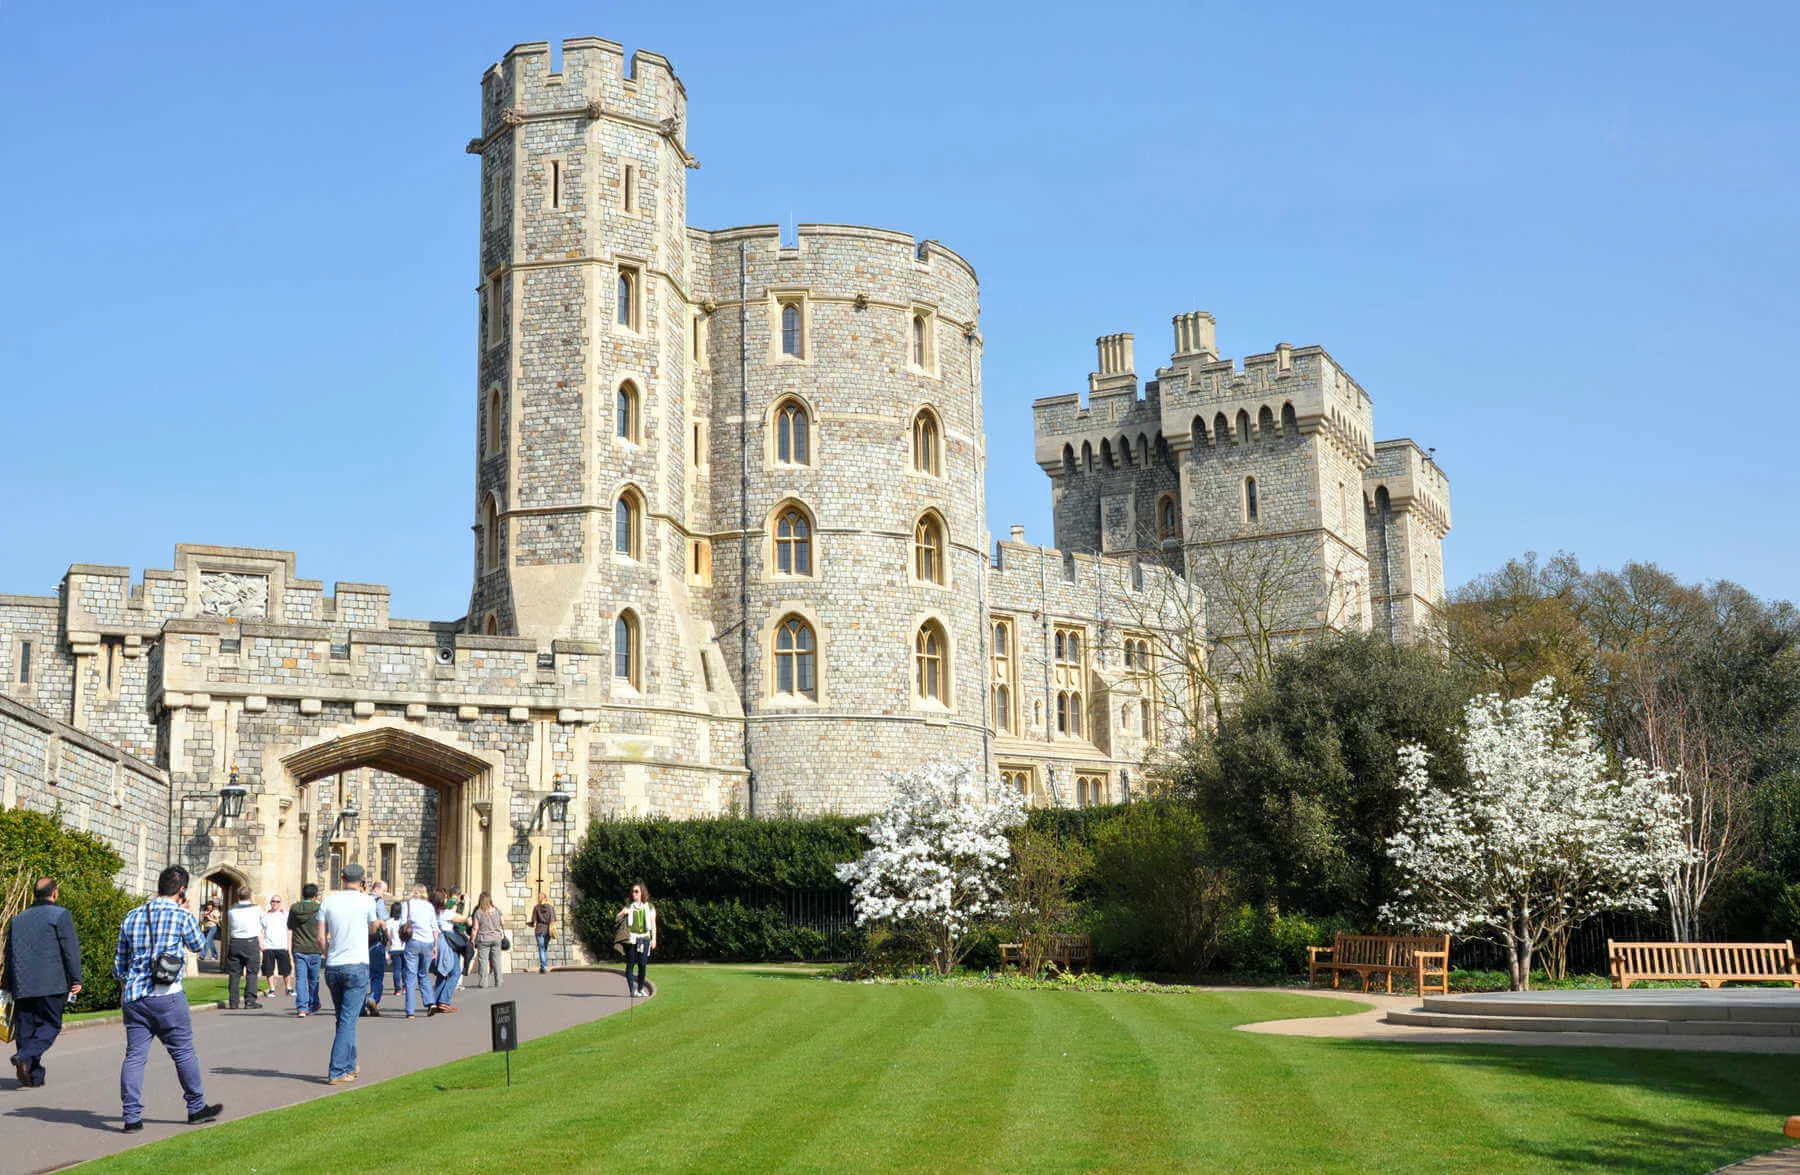 Less than an hour from London, Windsor Castle is the weekend home of Queen Elizabeth II and the site of Prince Harry and Meghan Markle's wedding